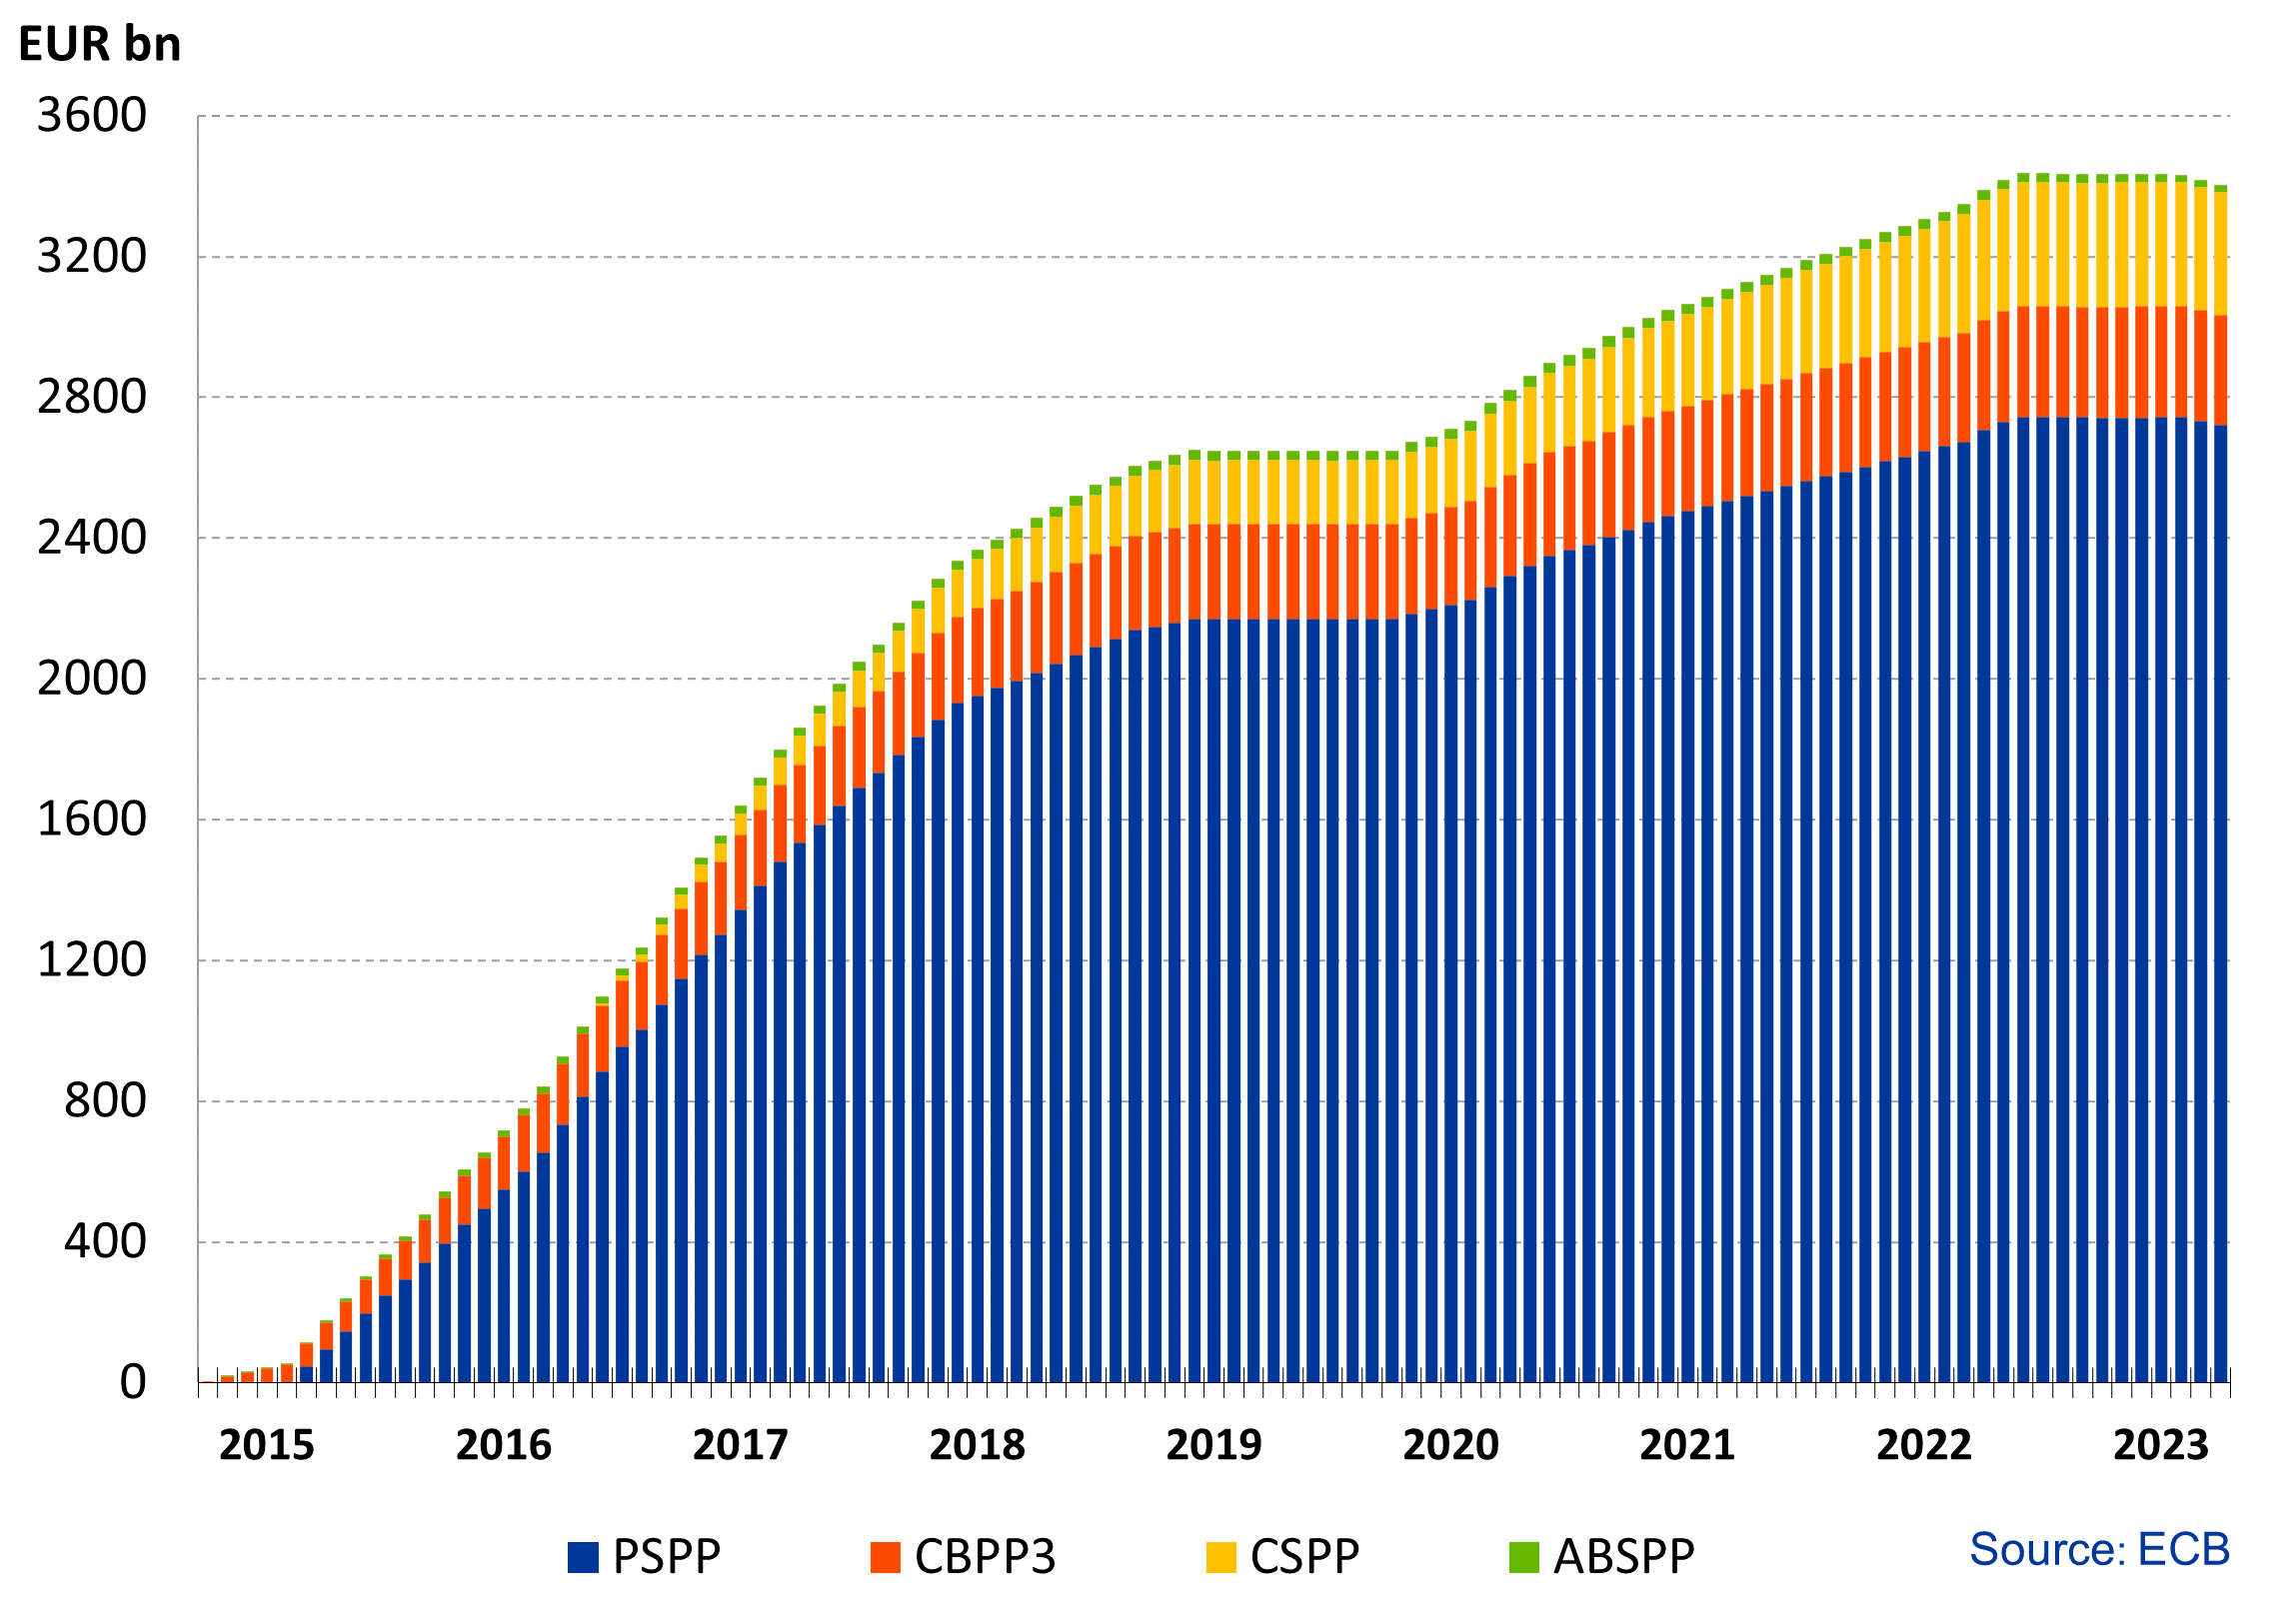 Eurosystem cumulative net asset purchases from 2015-2018, broken down by purchase programme type. Reinvestments from 2019.